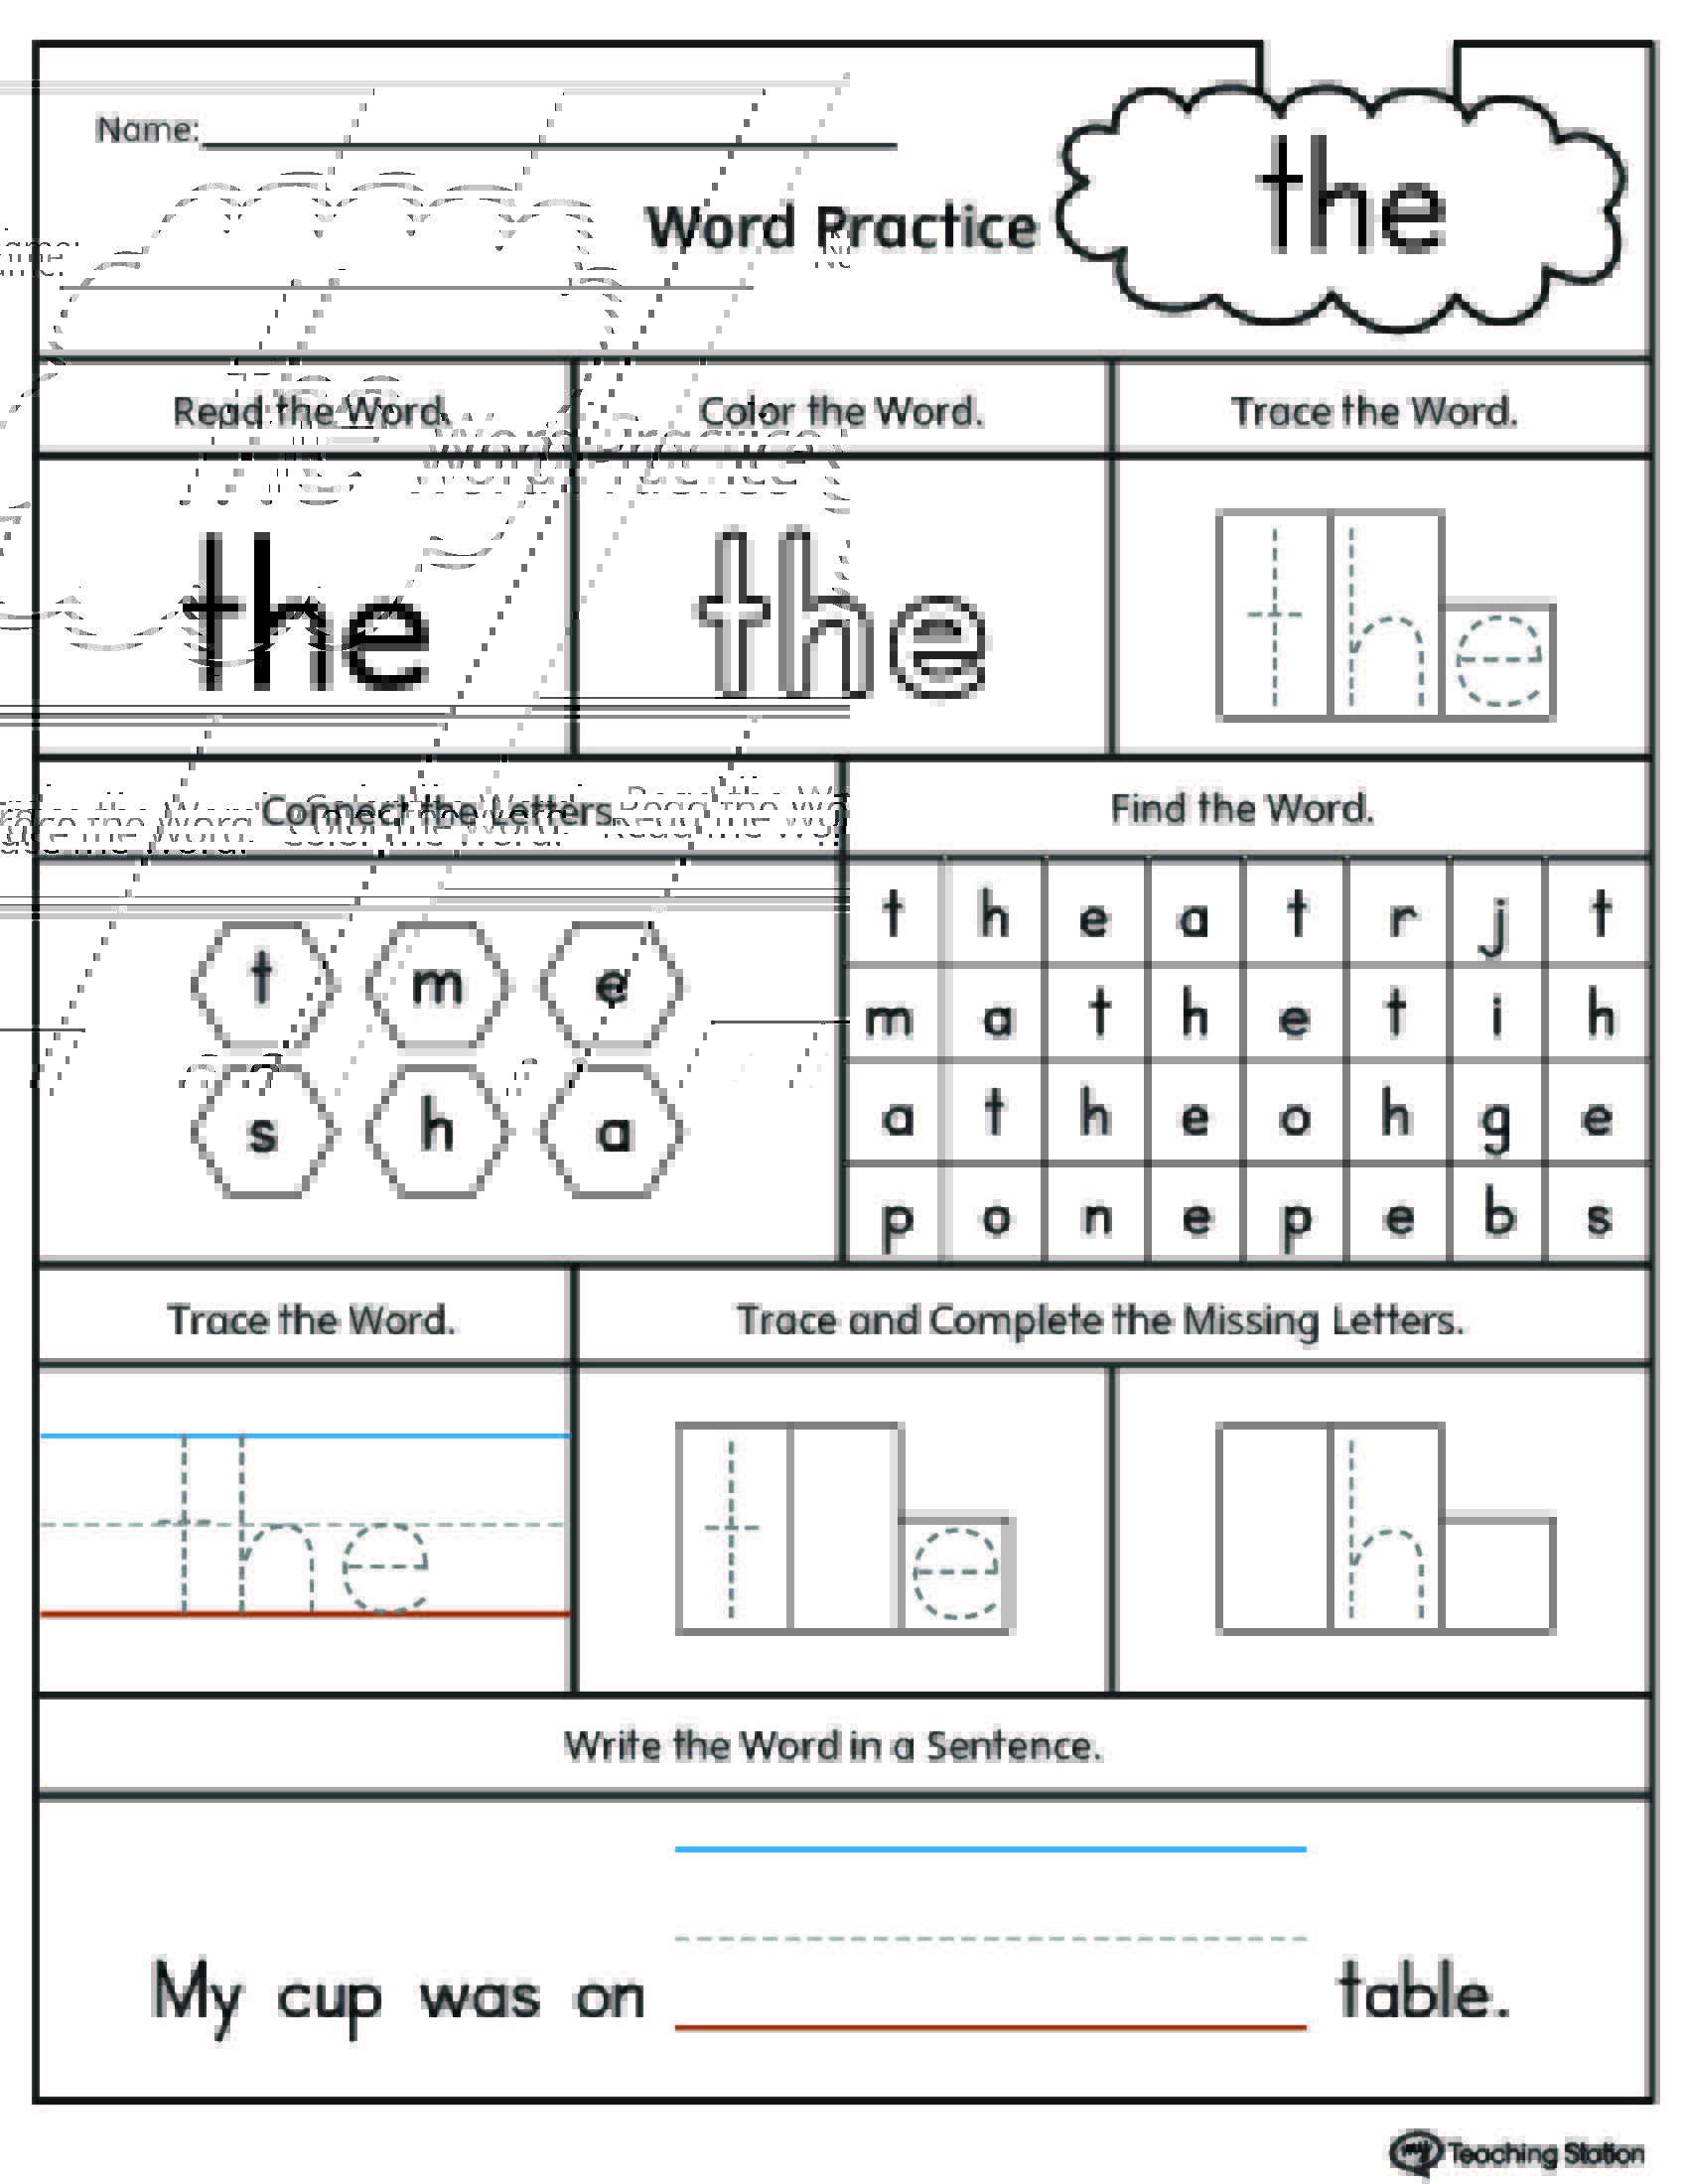 sight word this worksheet